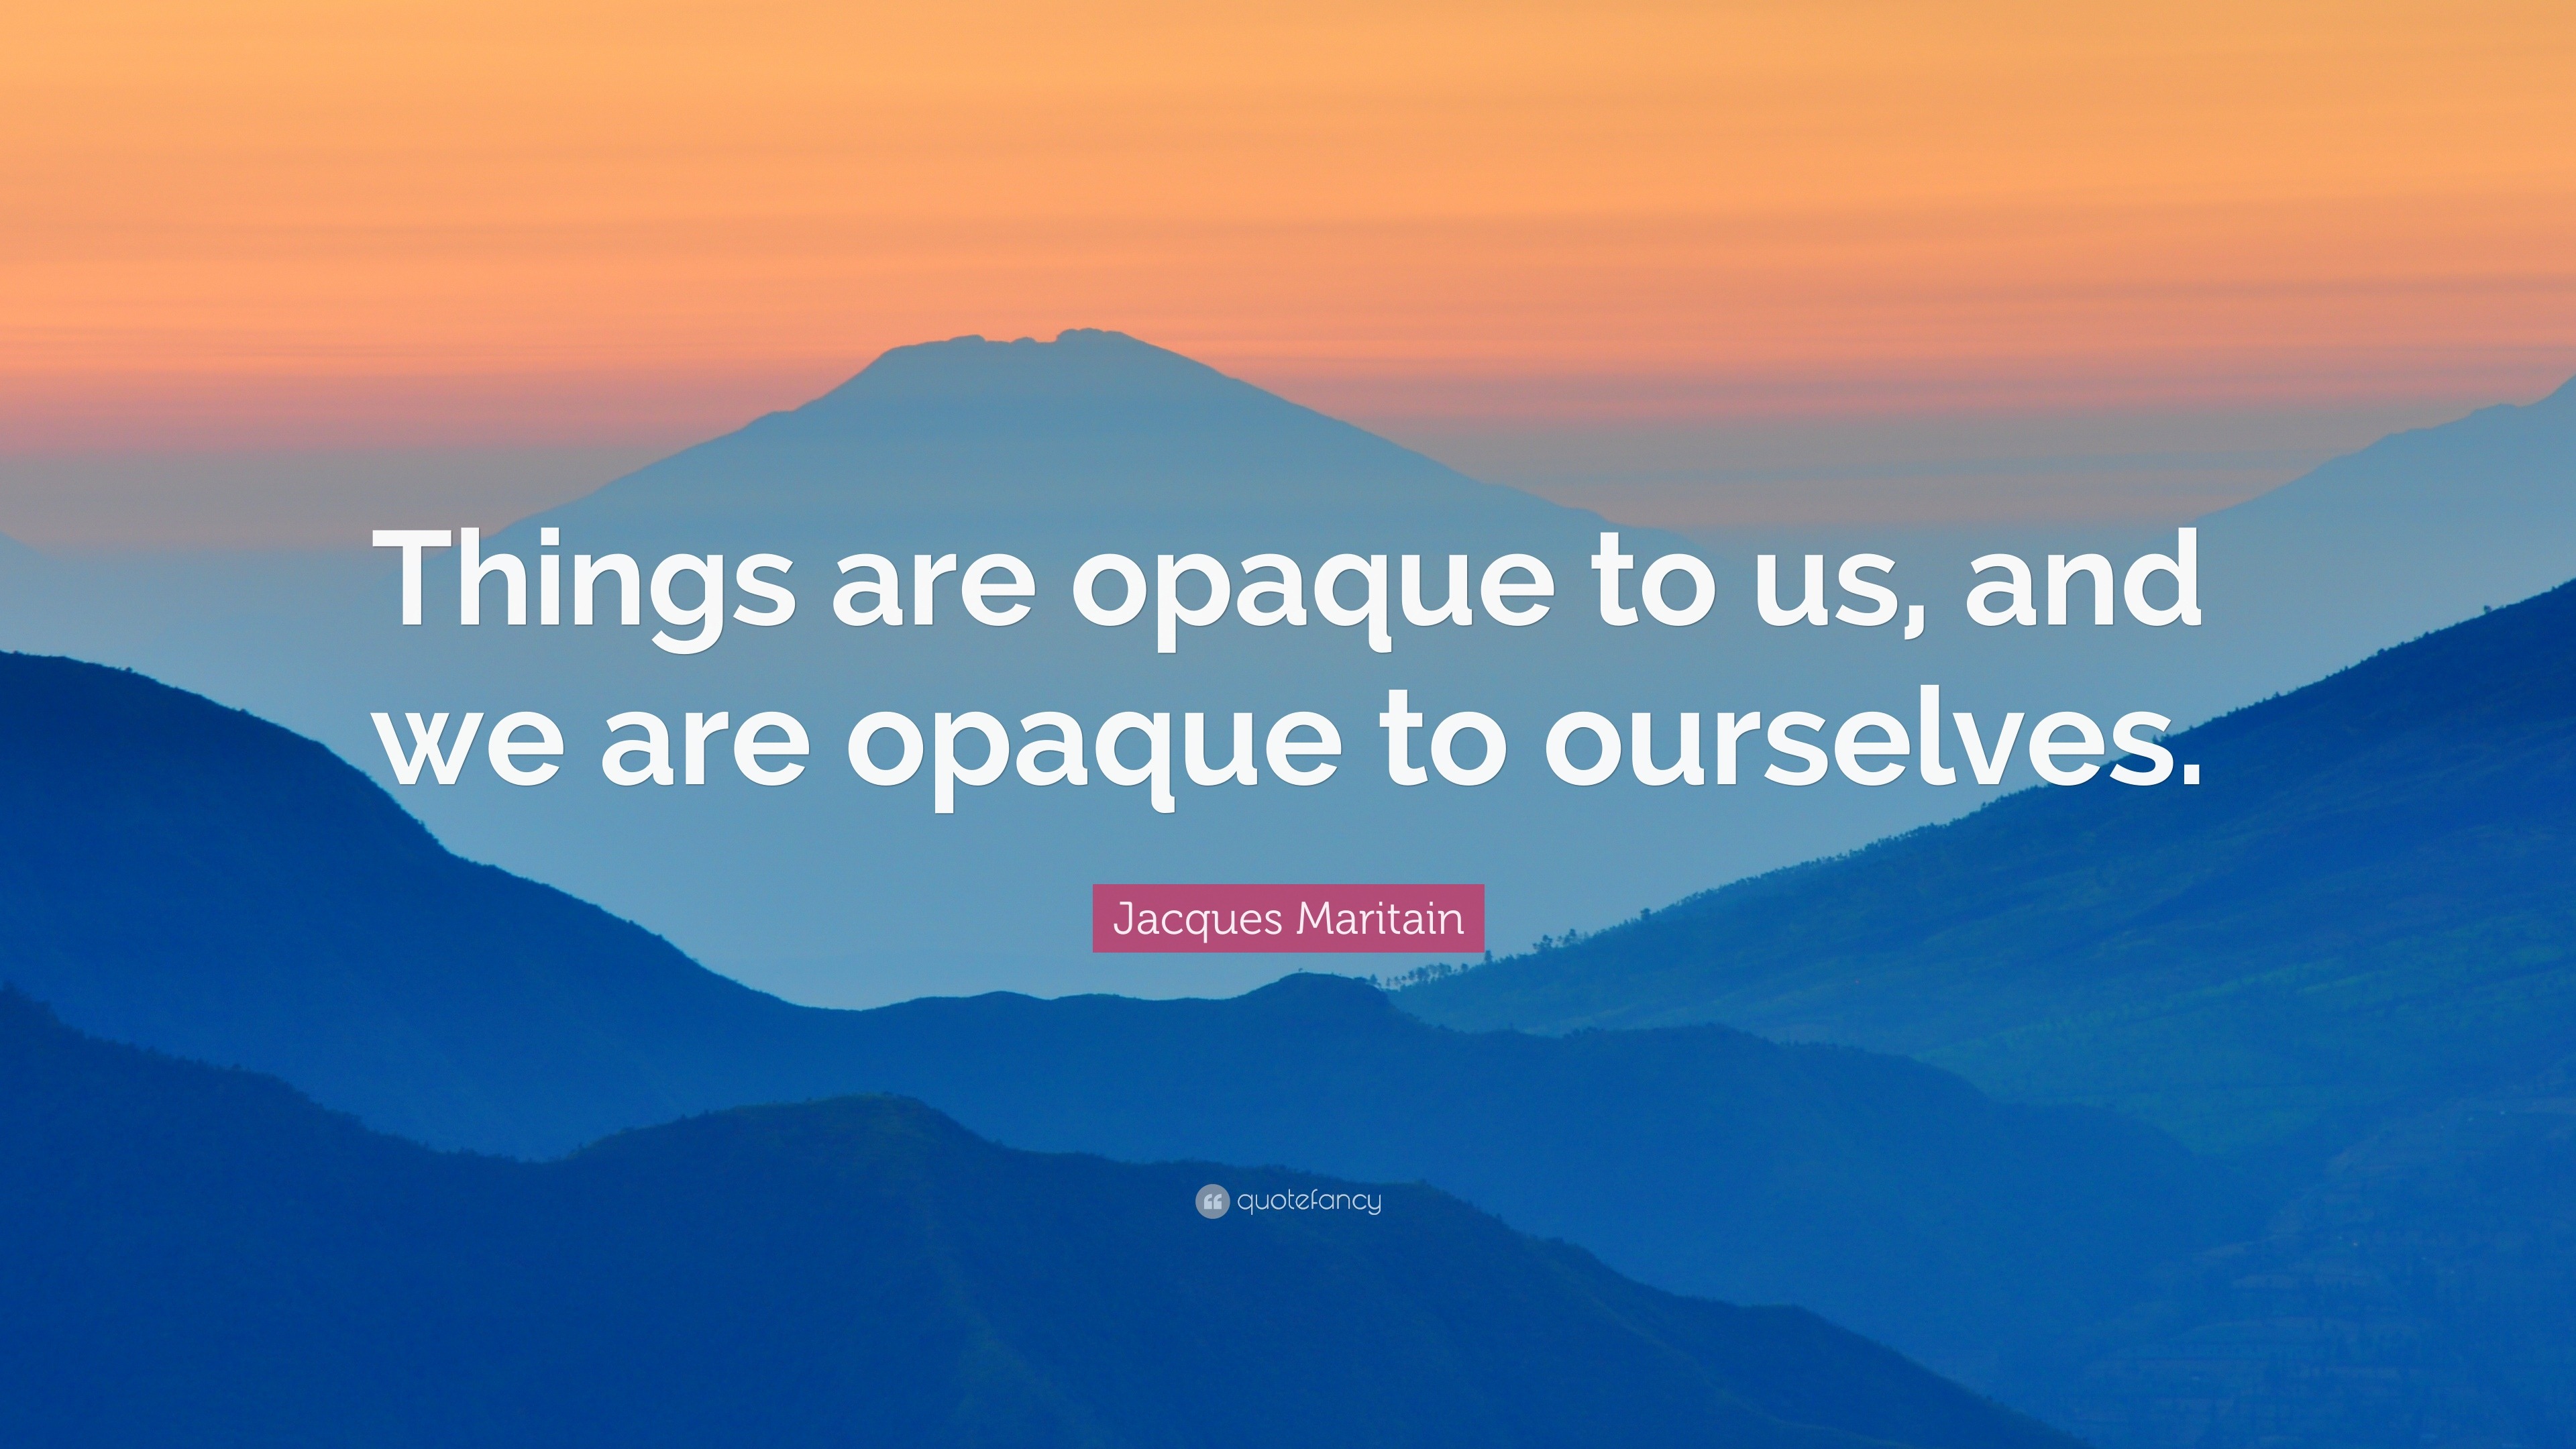 Jacques Maritain Quote: “Things are